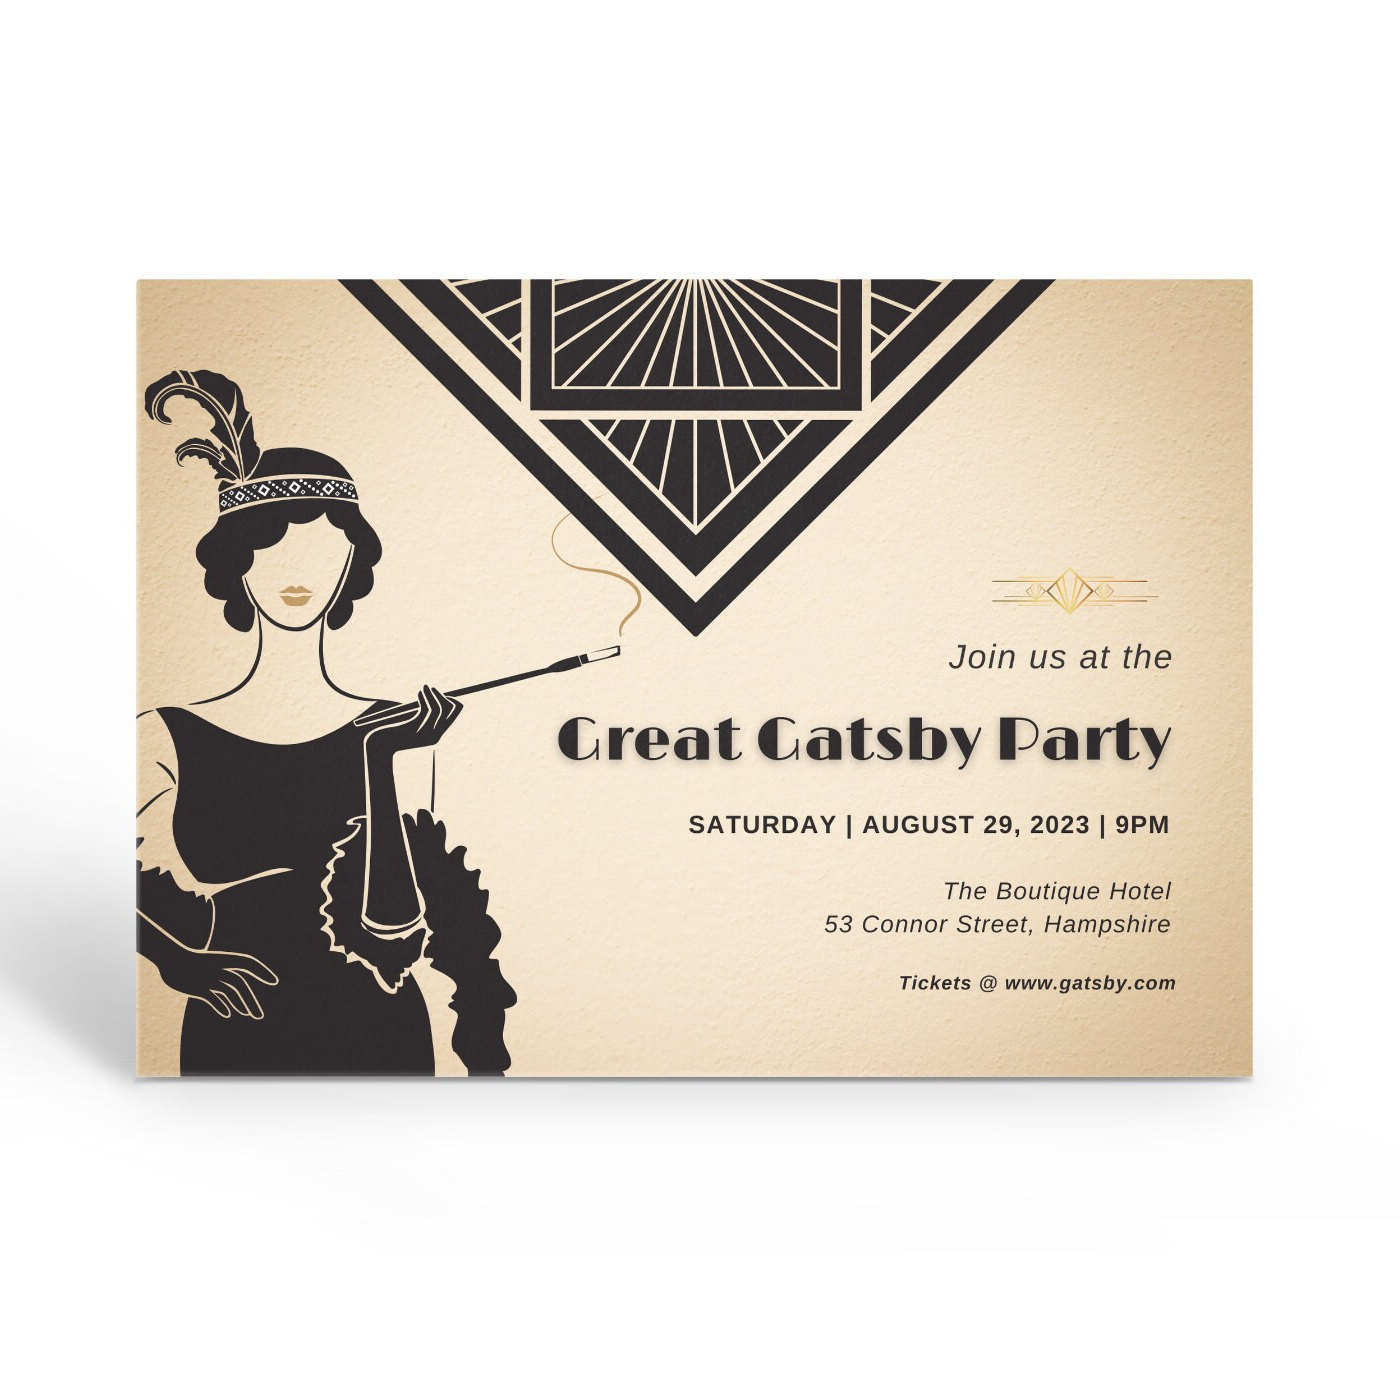 Roaring 20's Party Decor 24 X 36 SPEAKEASY WELCOME Sign Download